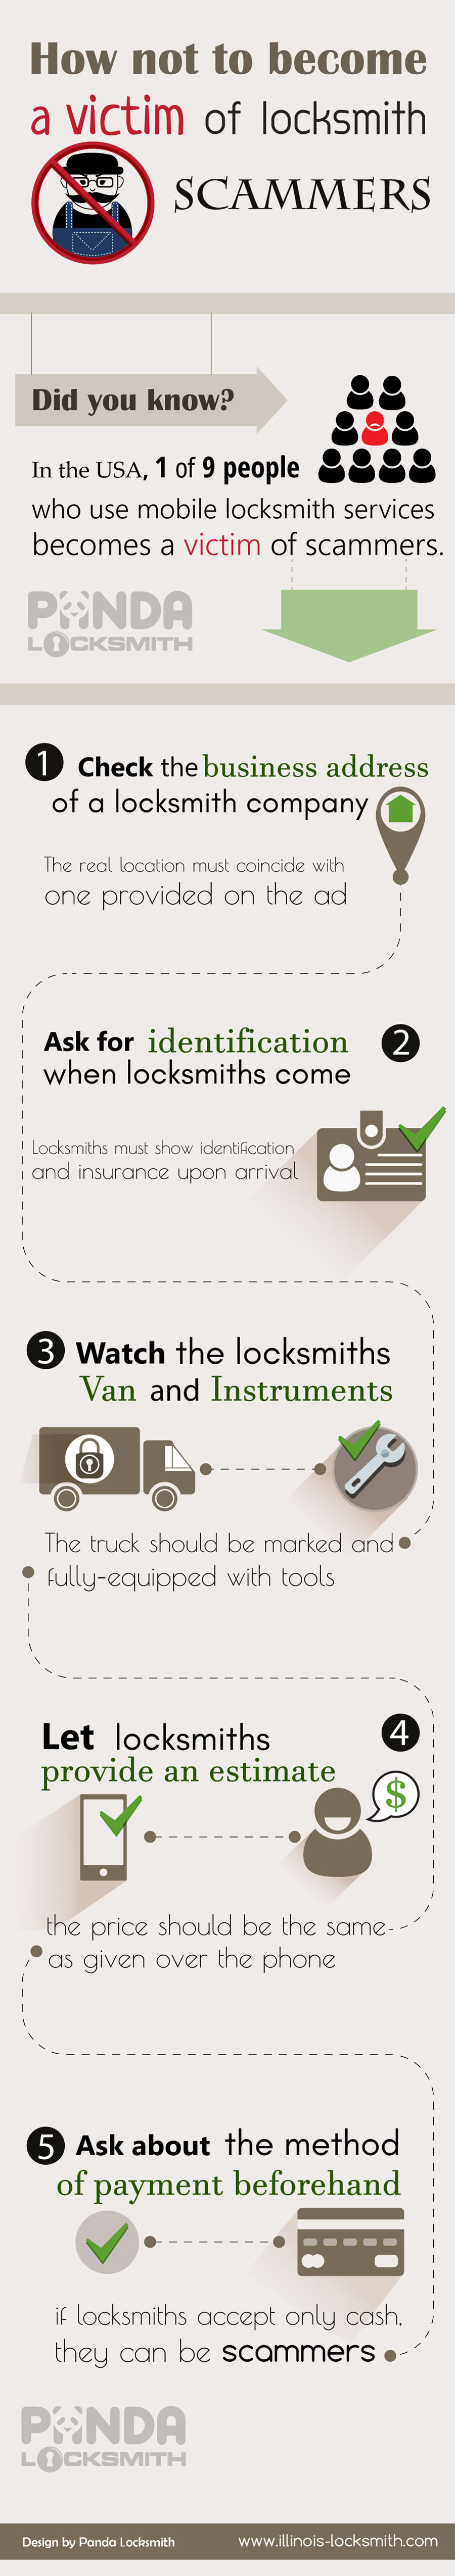 how not to become a victim of locksmith scammers Infographic